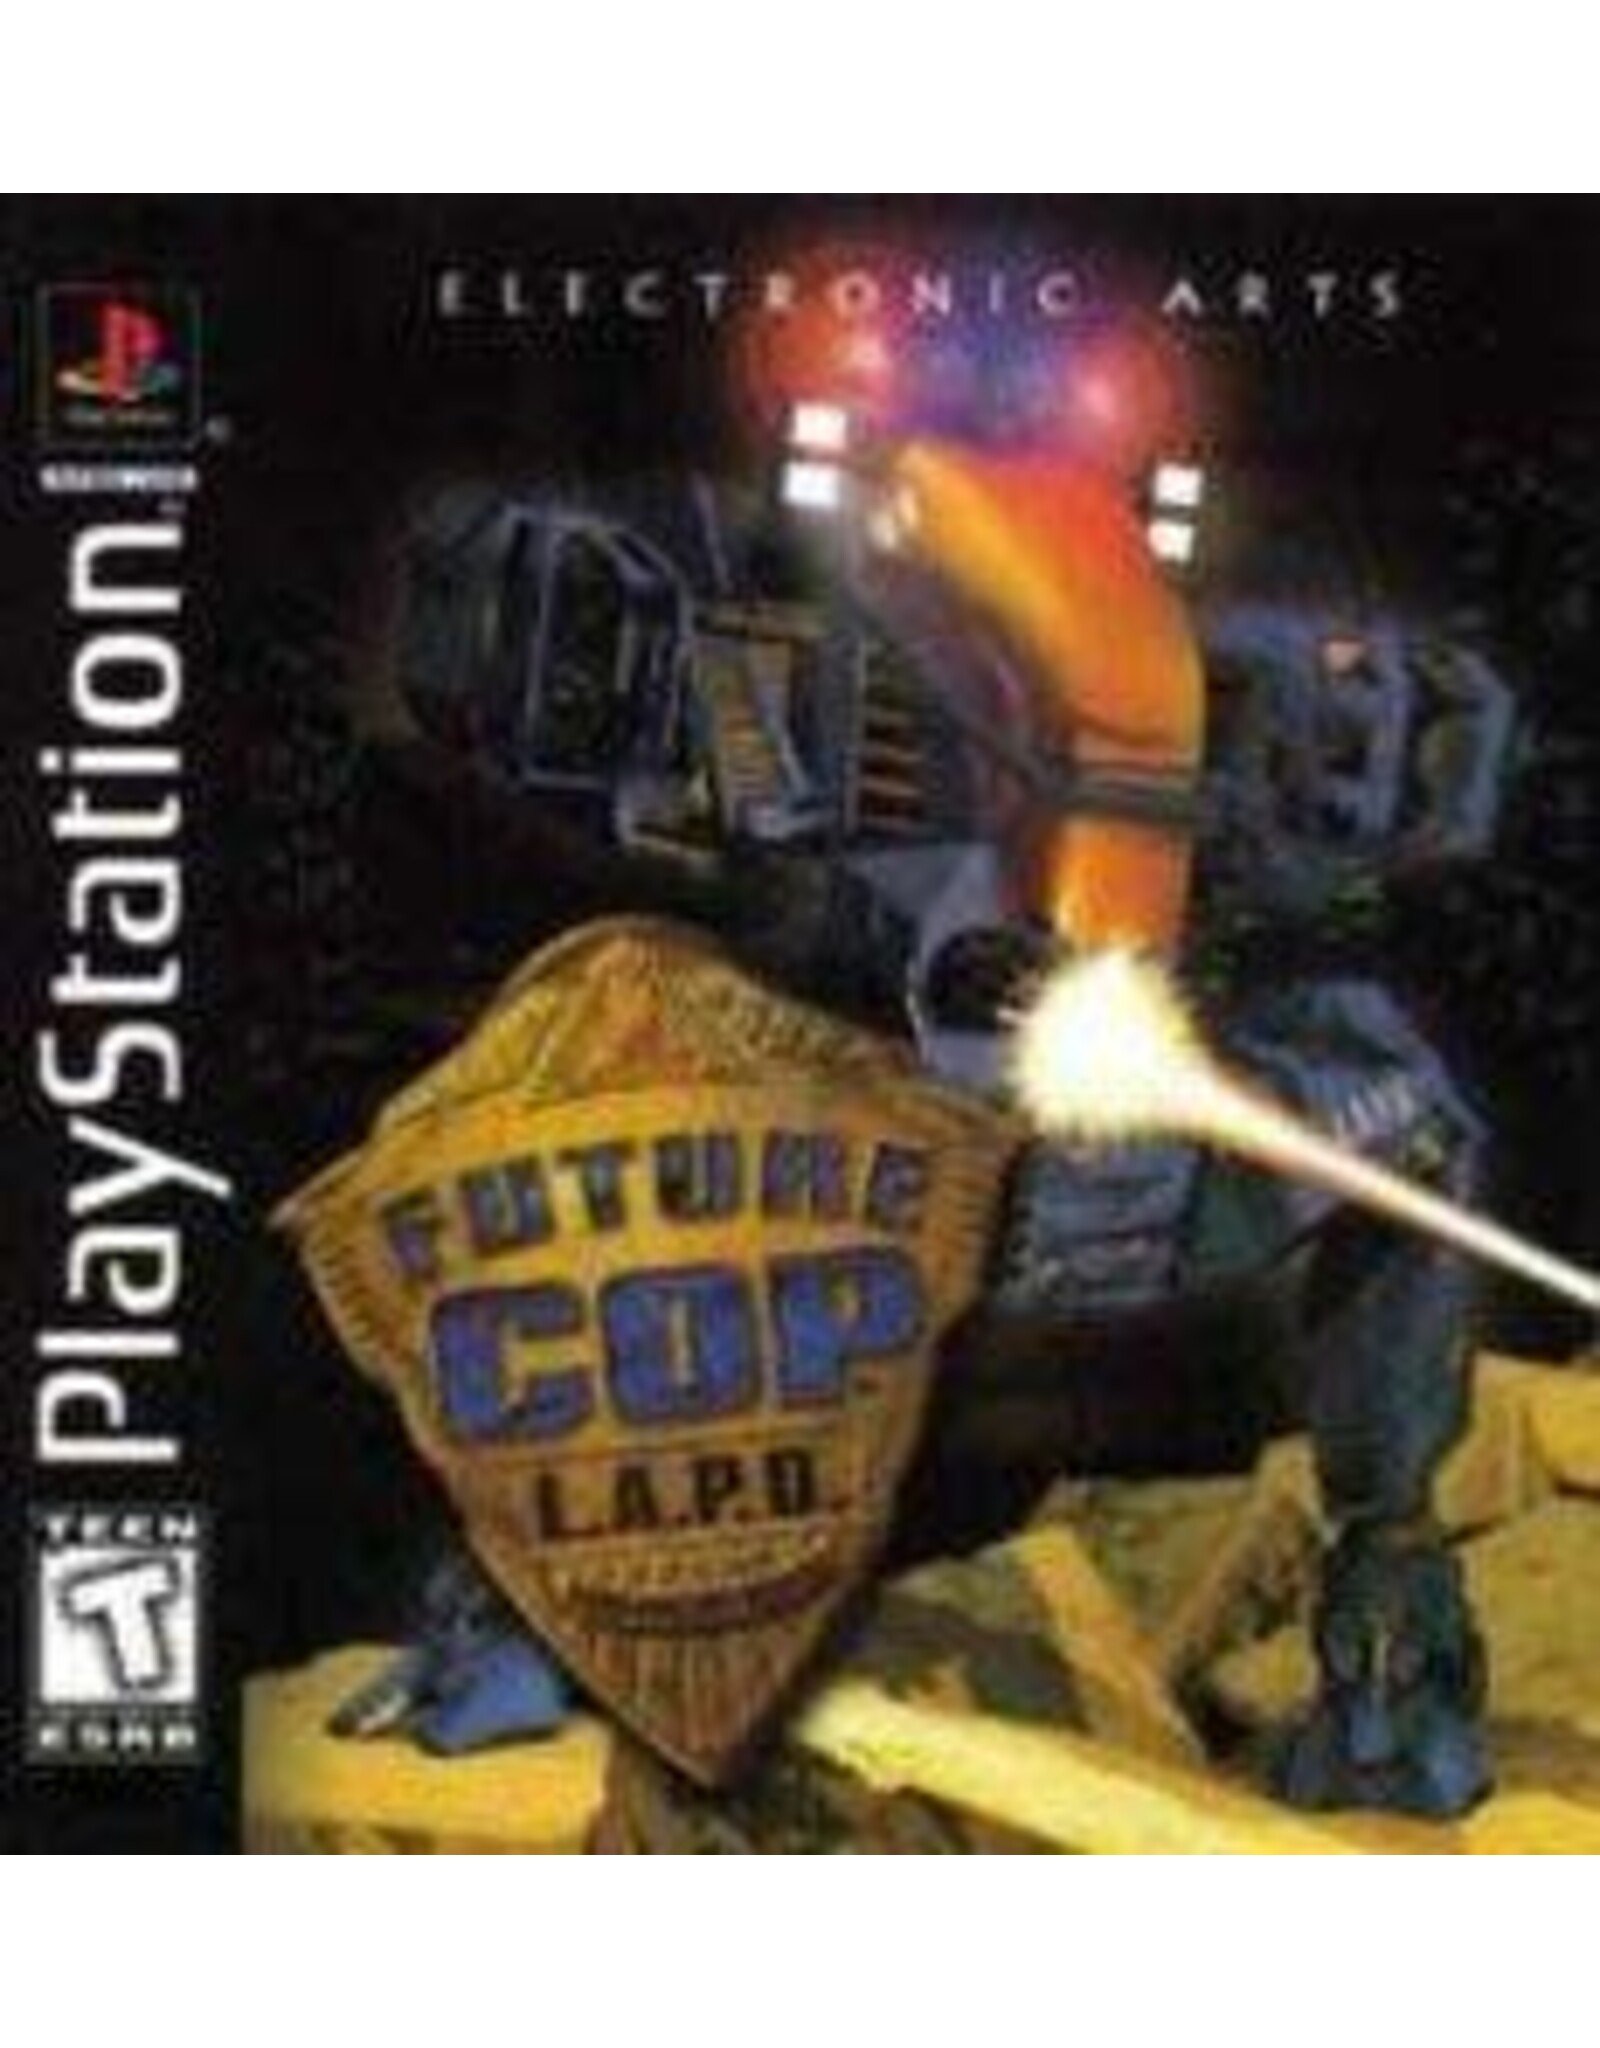 Playstation Future Cop LAPD (Disc Only)